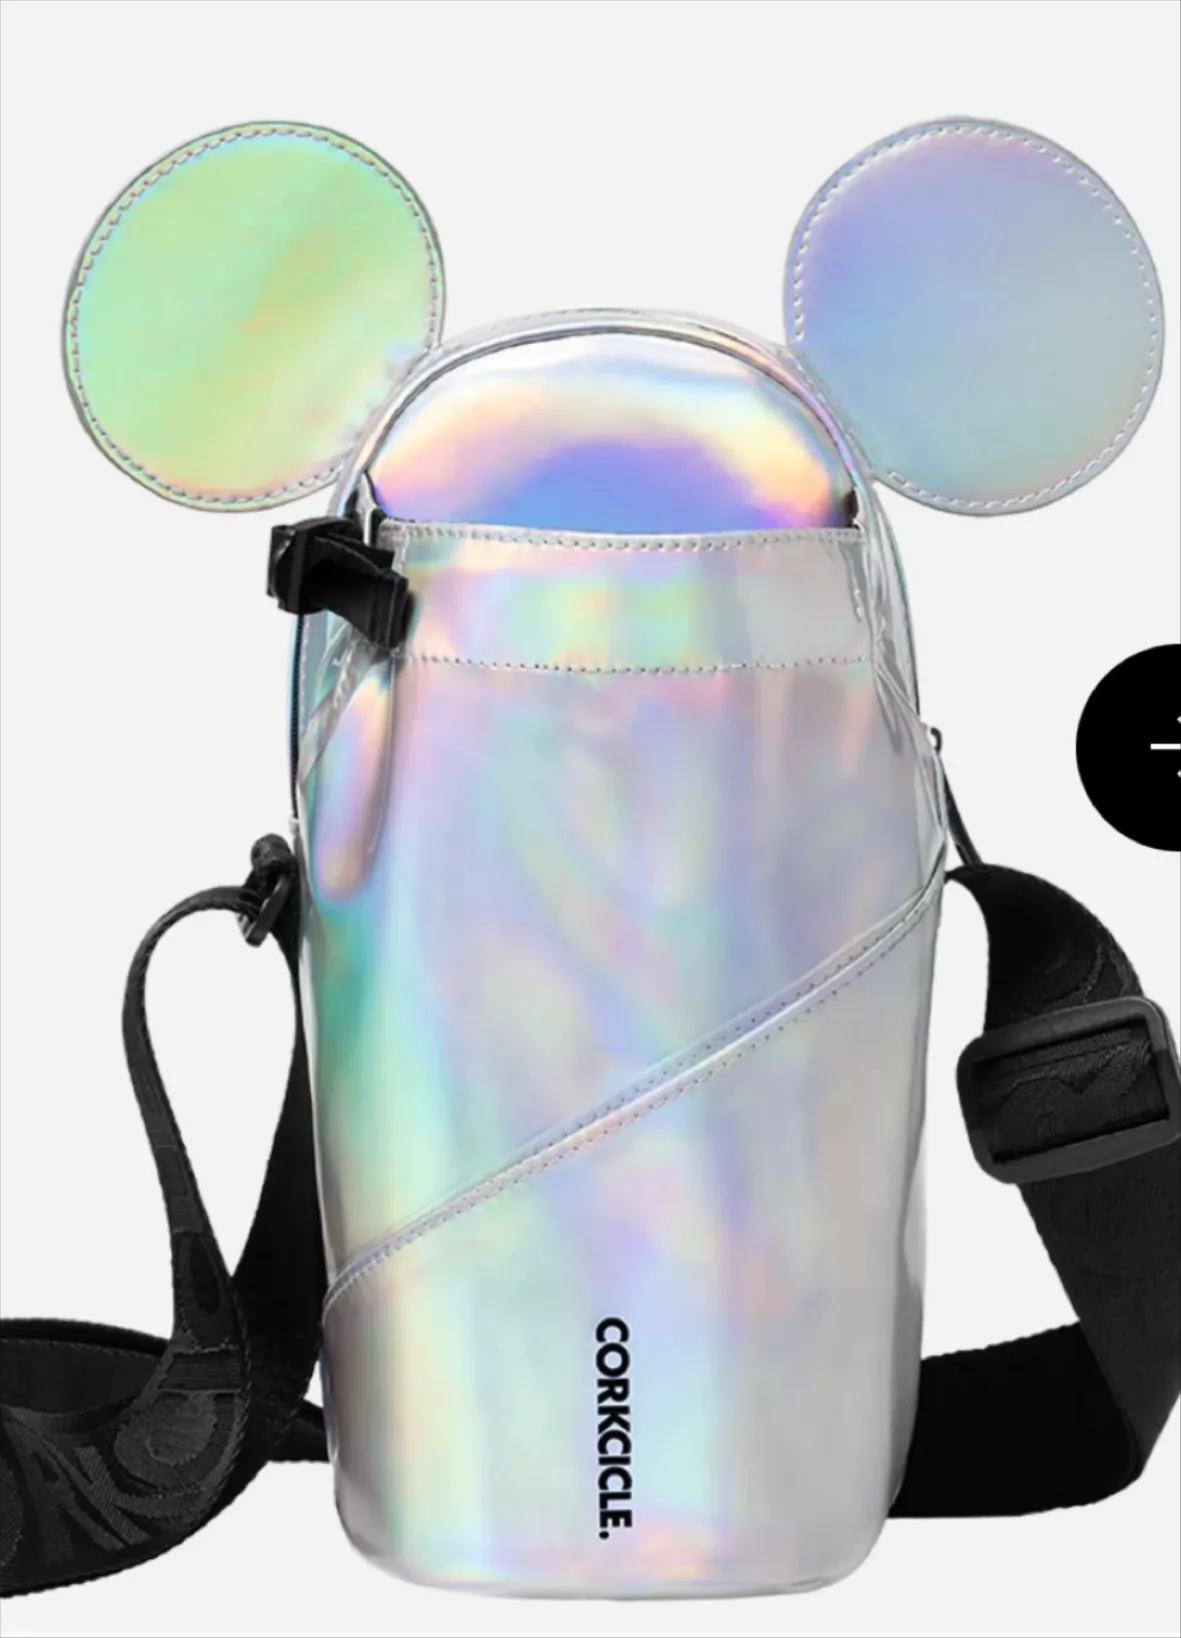 Mickey Mouse Sling Bag